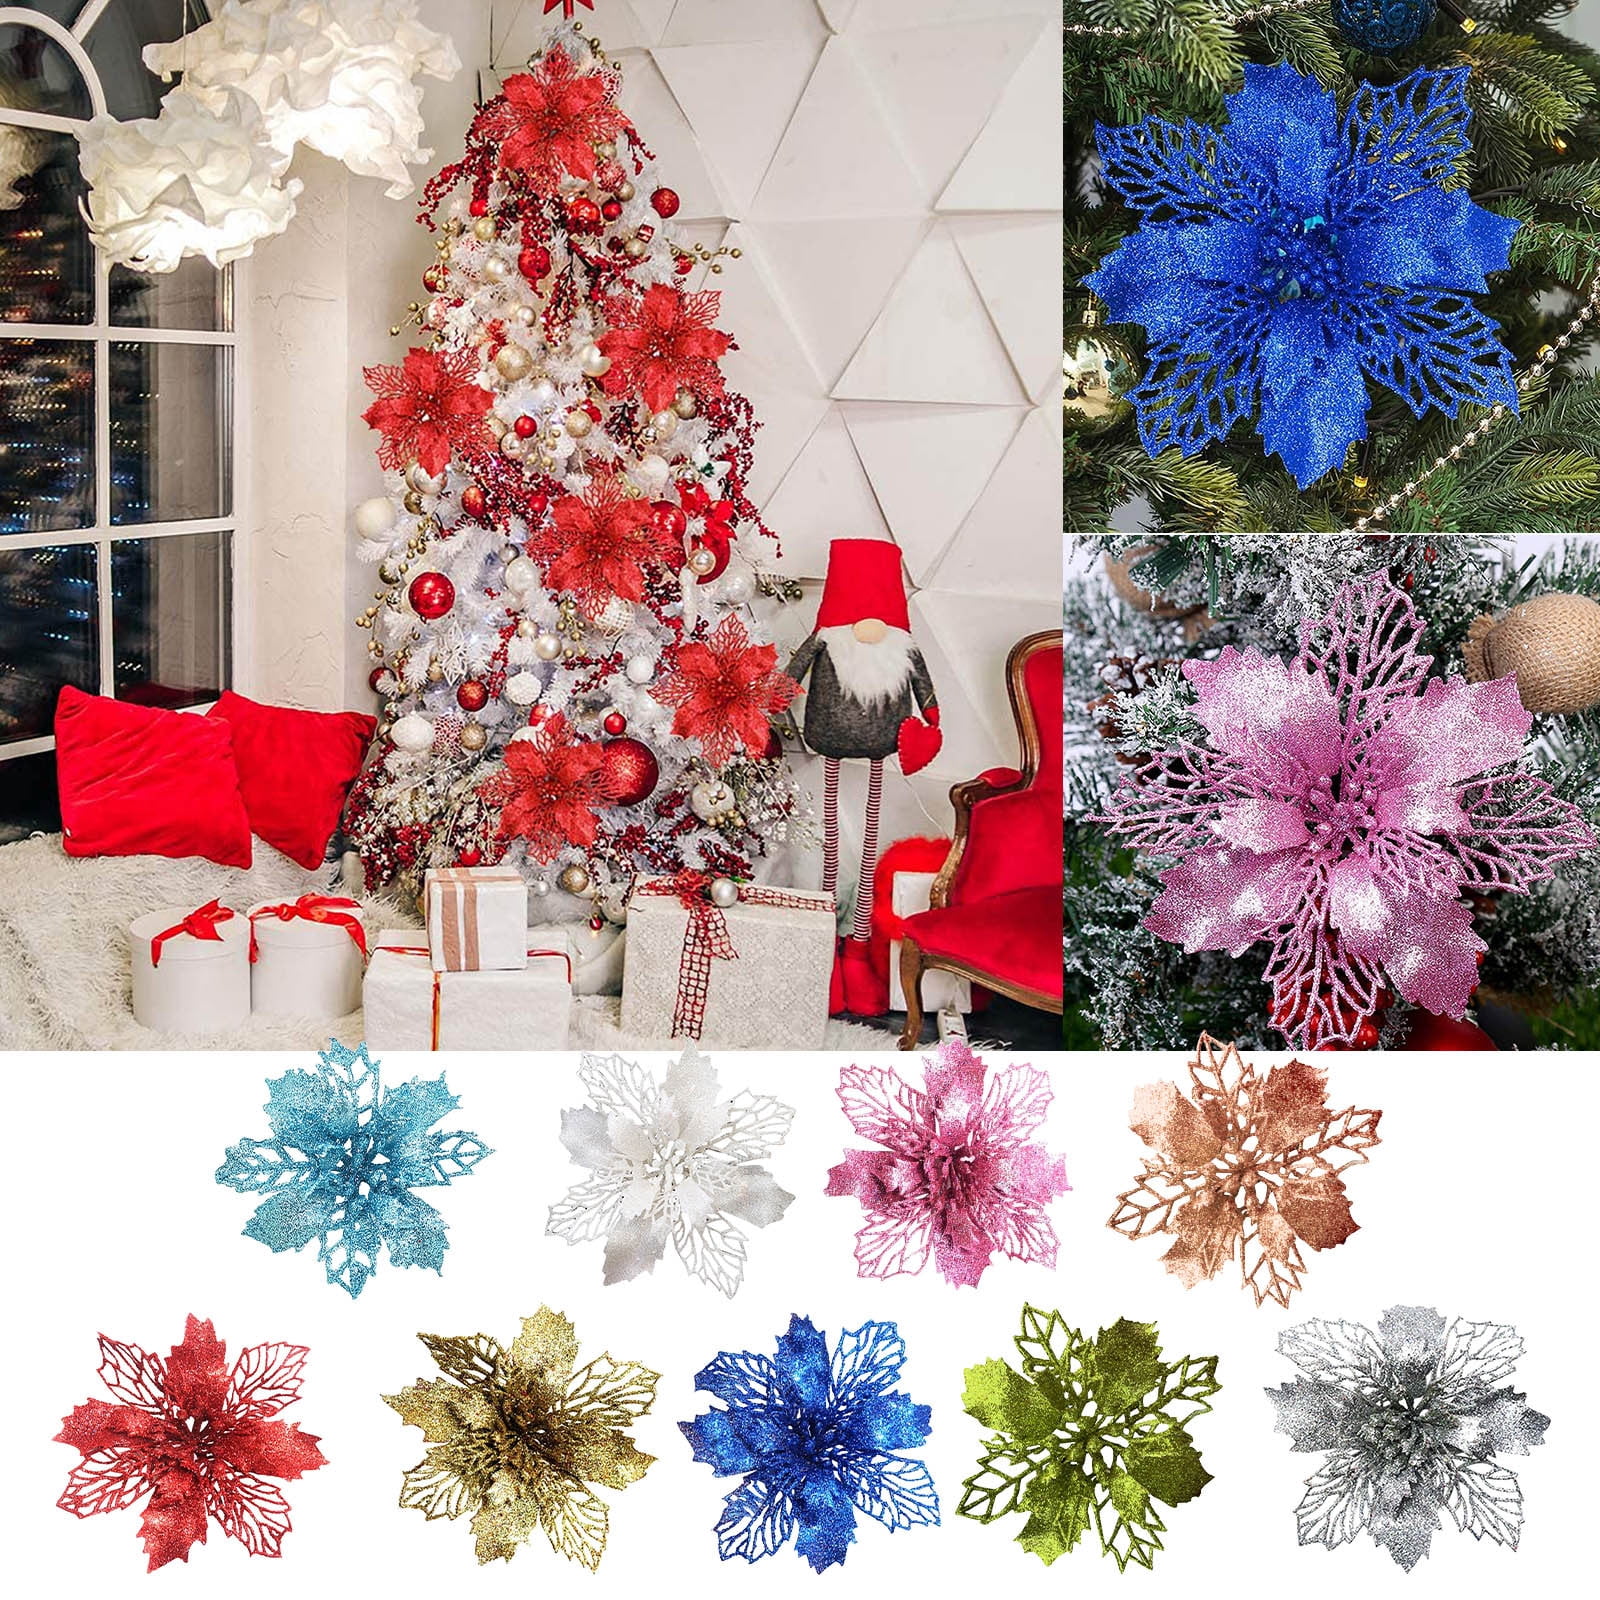 Silver Christmas Glitter Poinsettia Flower Christmas Tree Ornaments Artifical Flowers for Christmas Tree Decoration Wreath Garland-12 Pcs